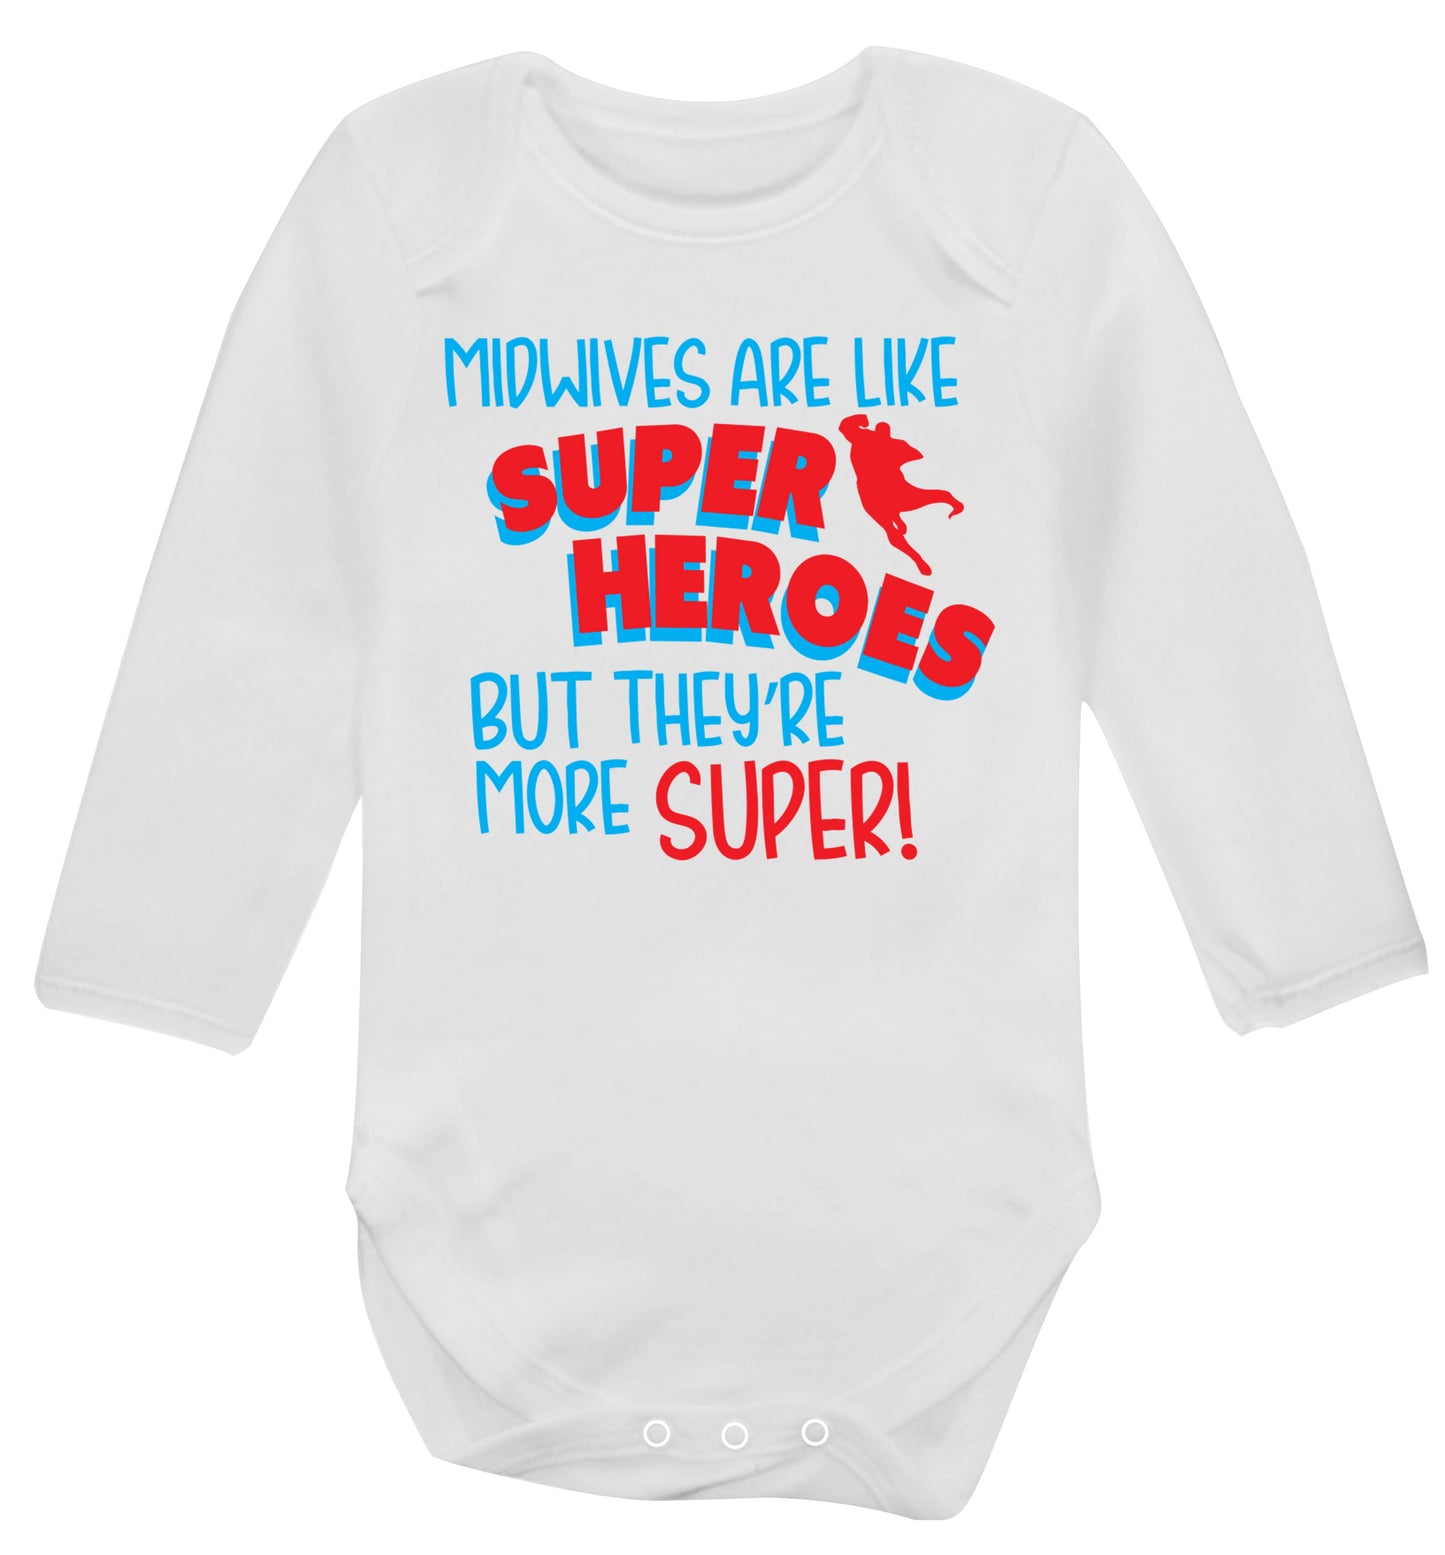 Midwives are like superheros but they're more super Baby Vest long sleeved white 6-12 months